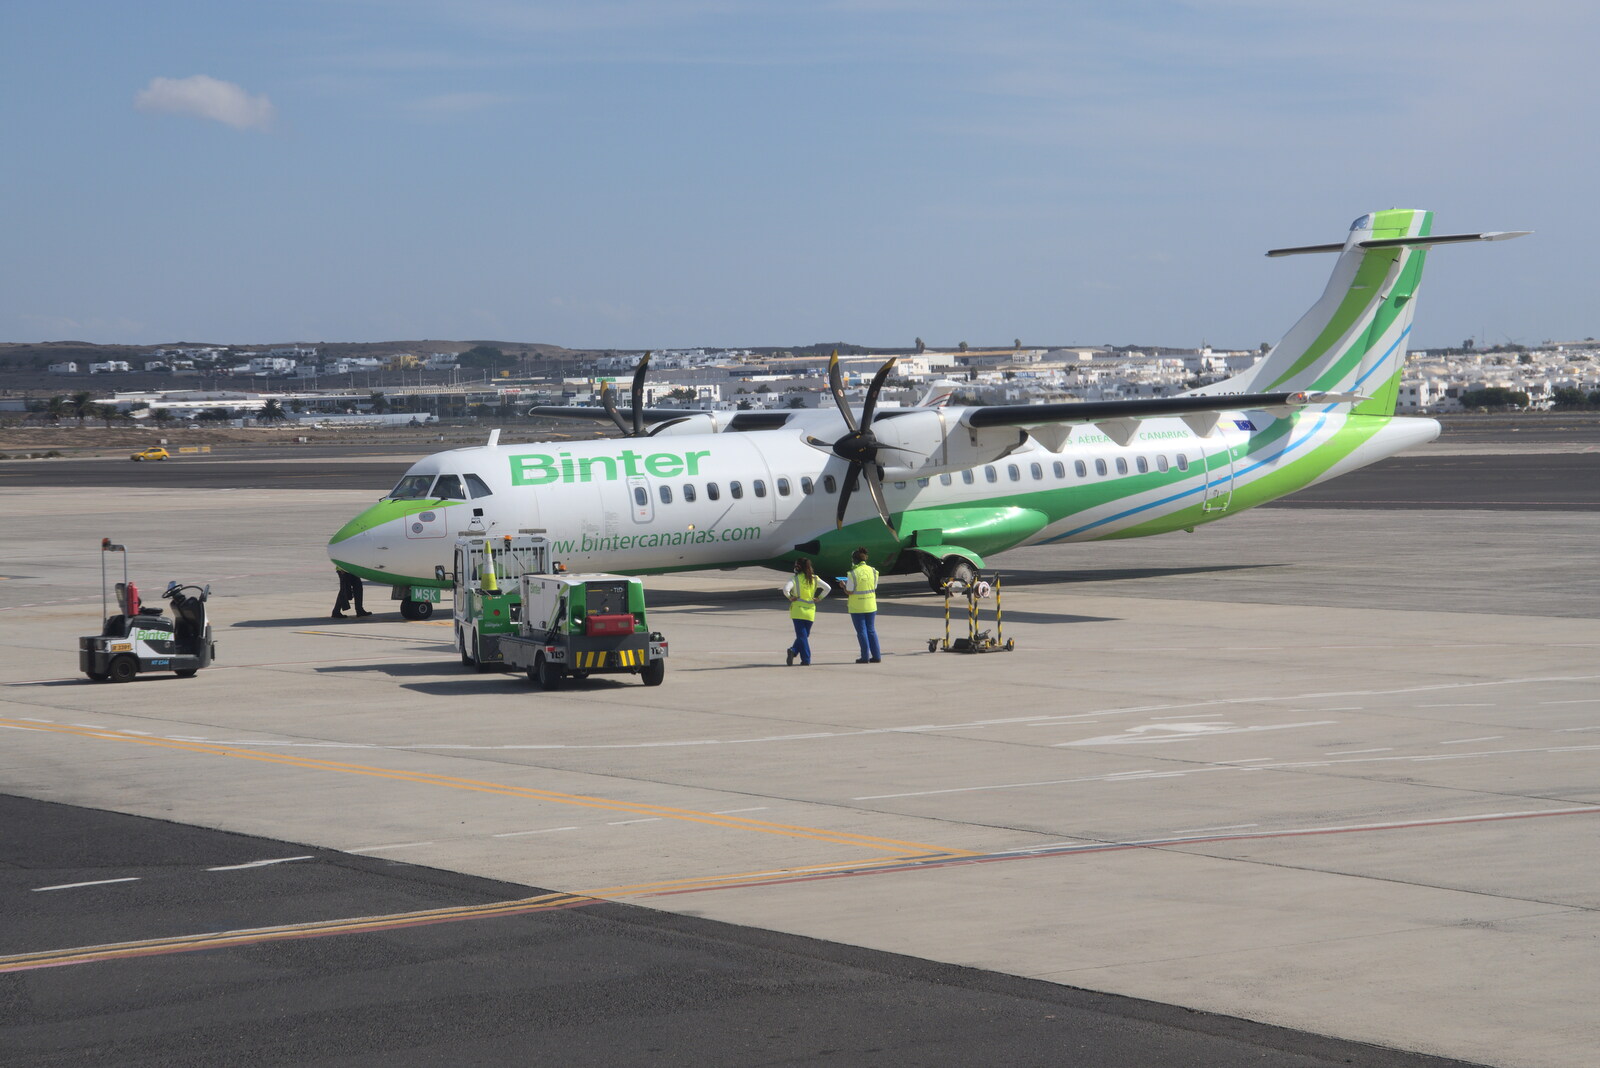 A Dash-8 in Binter livery at Arrecife from The Volcanoes of Lanzarote, Canary Islands, Spain - 27th October 2021